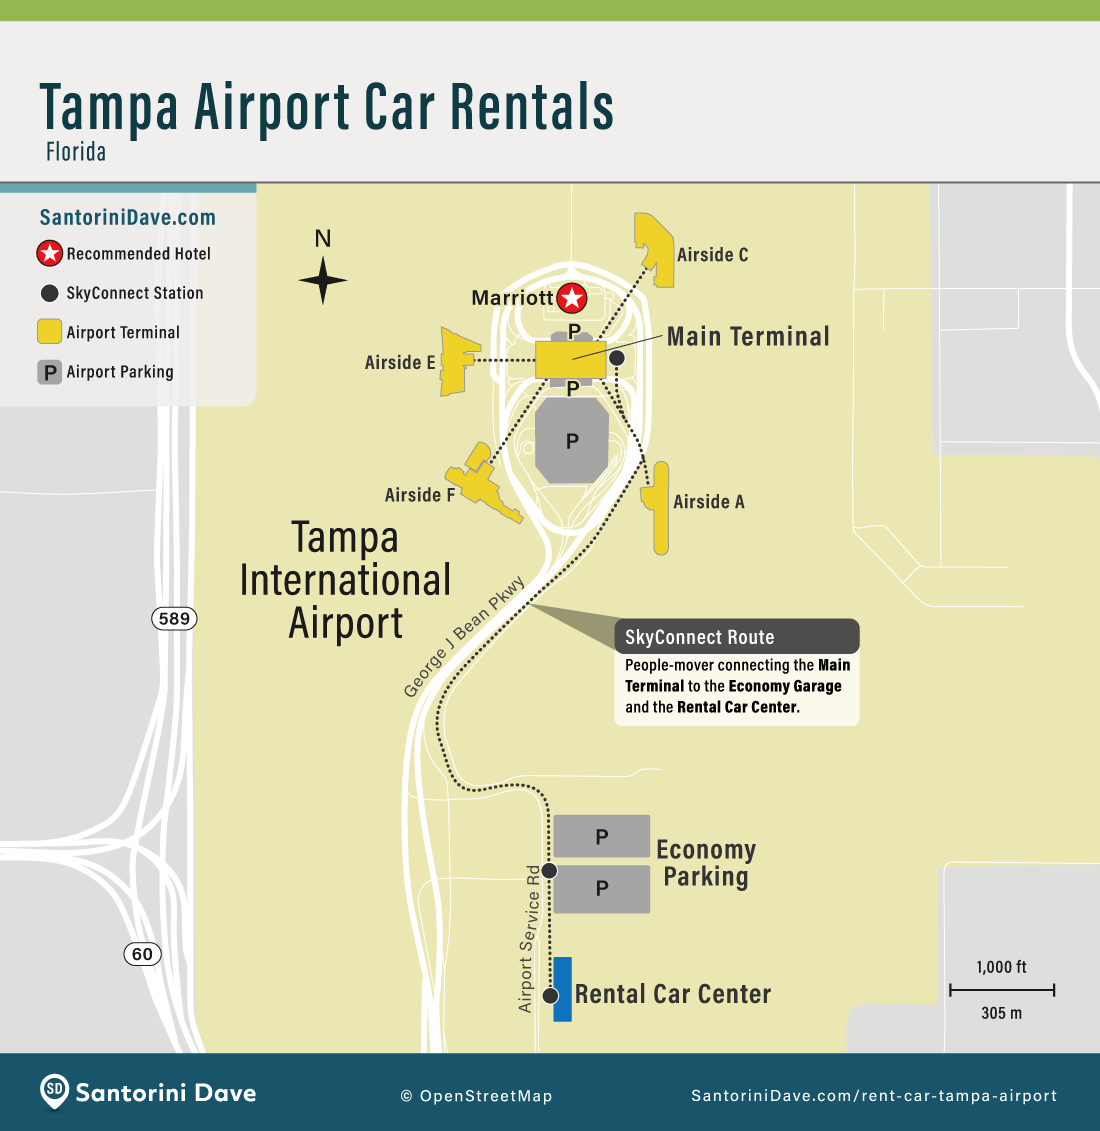 Tampa Airport car rentals map showing the SkyConnect Route to the Renal Car Center.